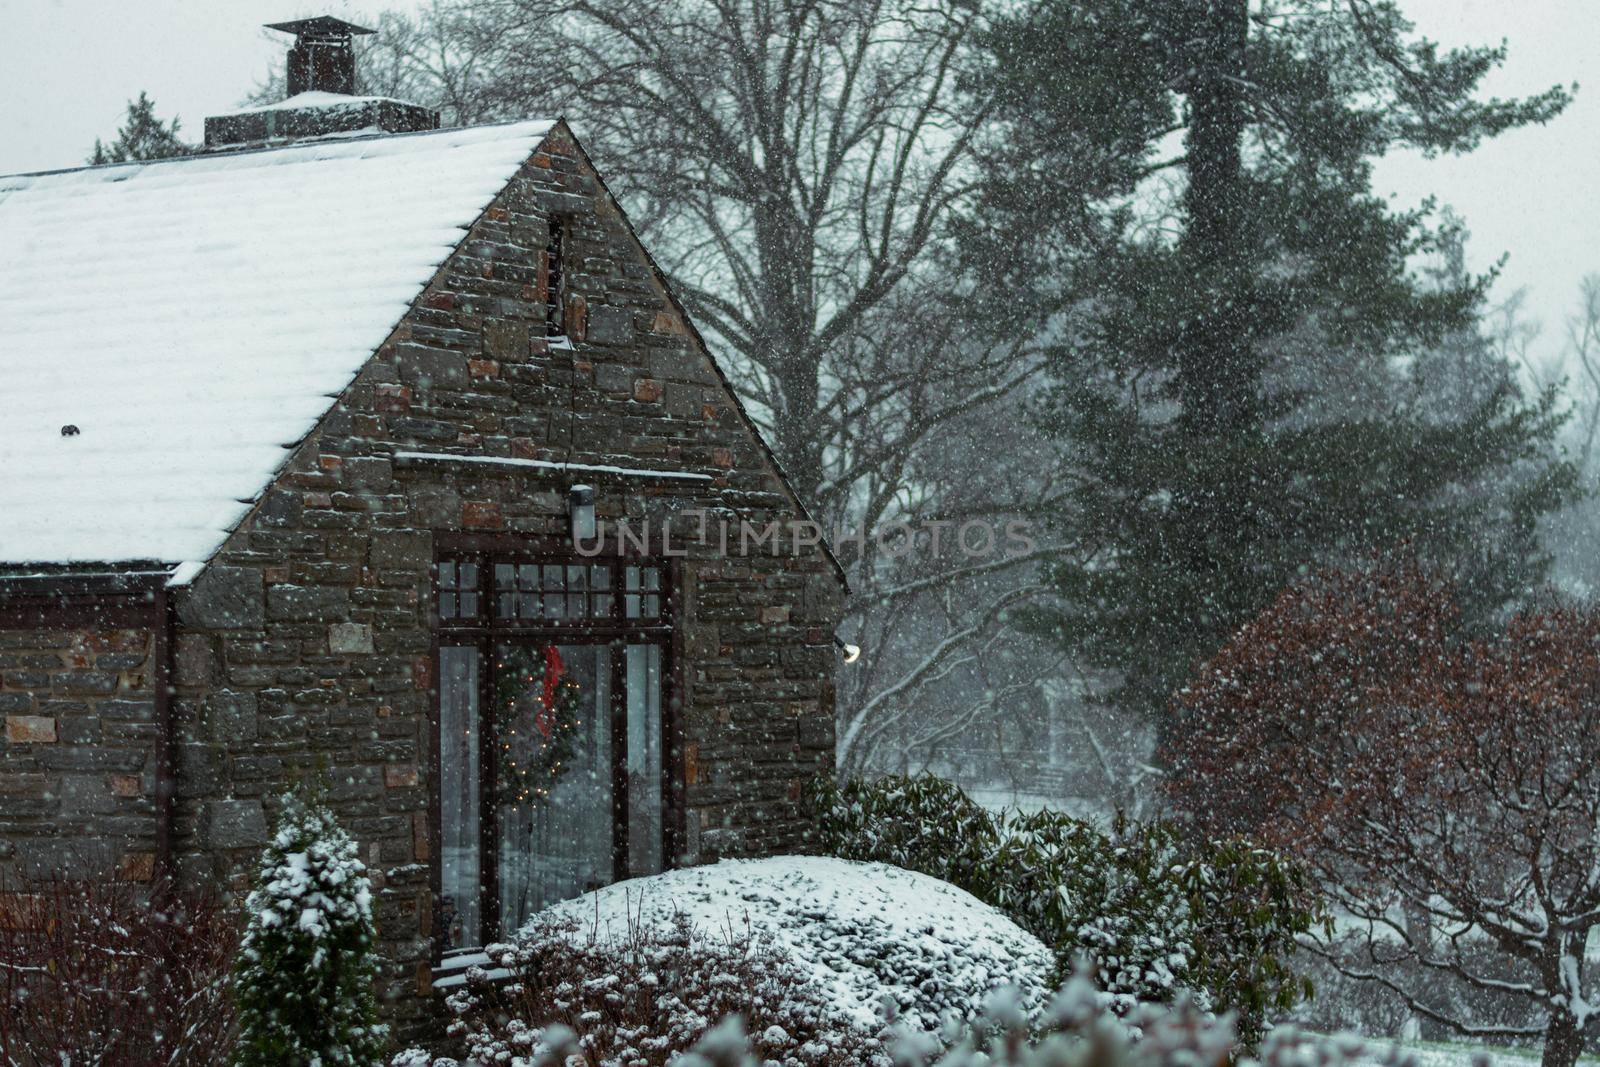 A Cobble Suburban Home and Street During a Snowstorm by bju12290